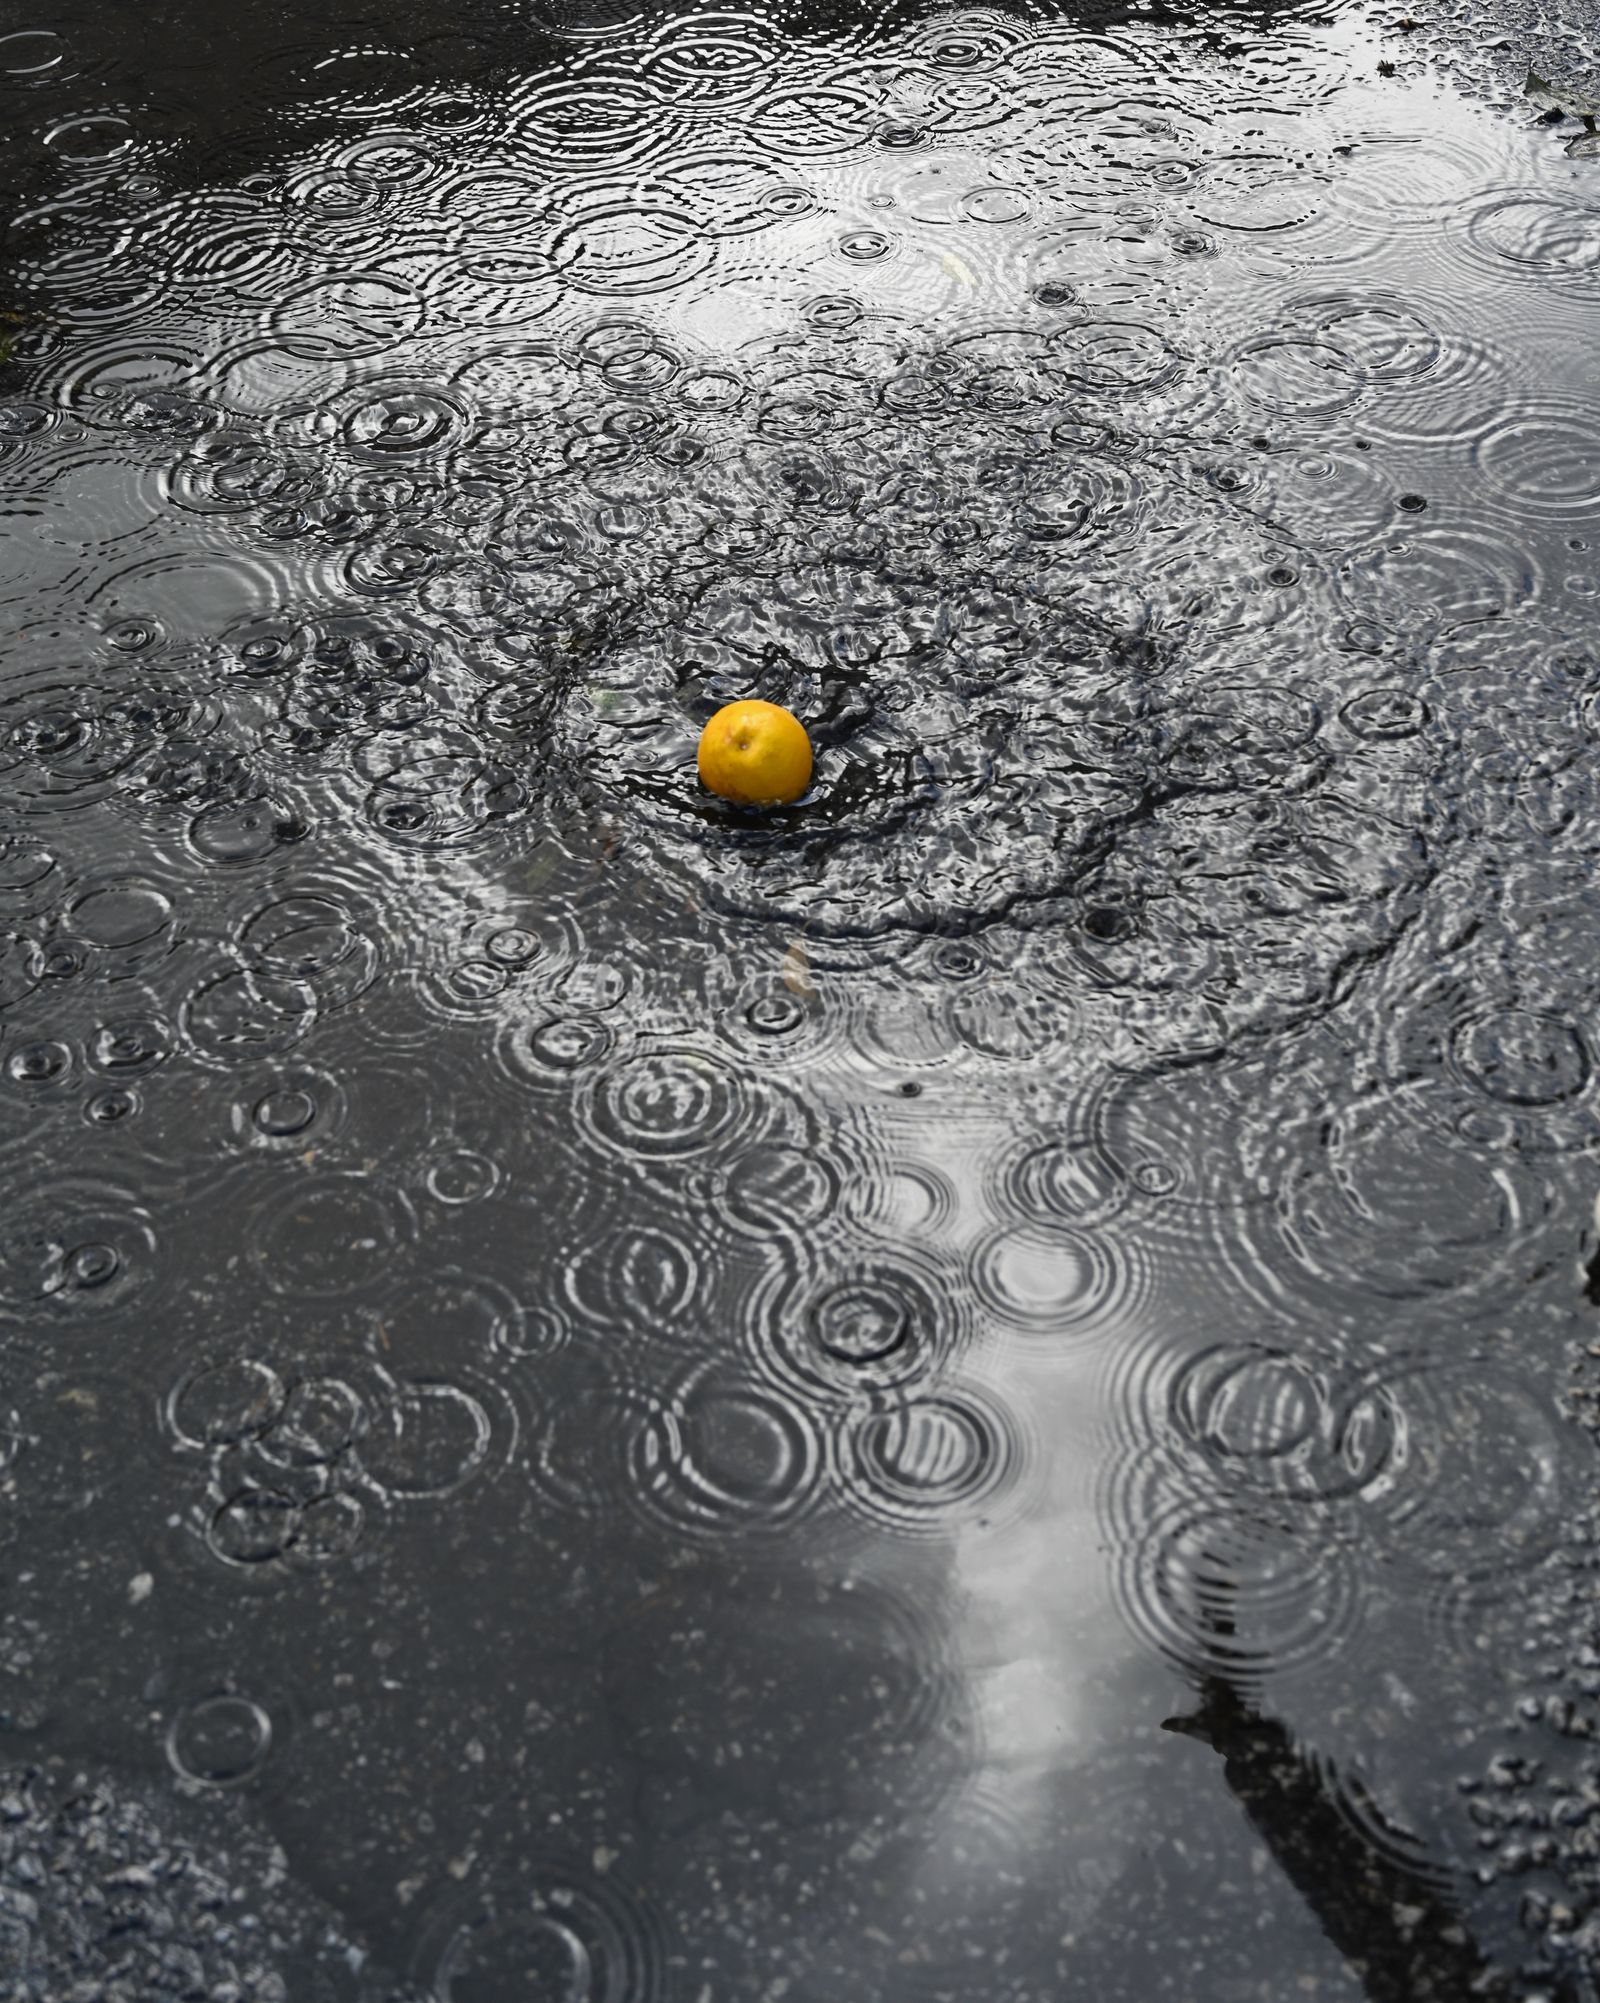 © Danelle Cole - Let’s throw a lemon into a puddle of water